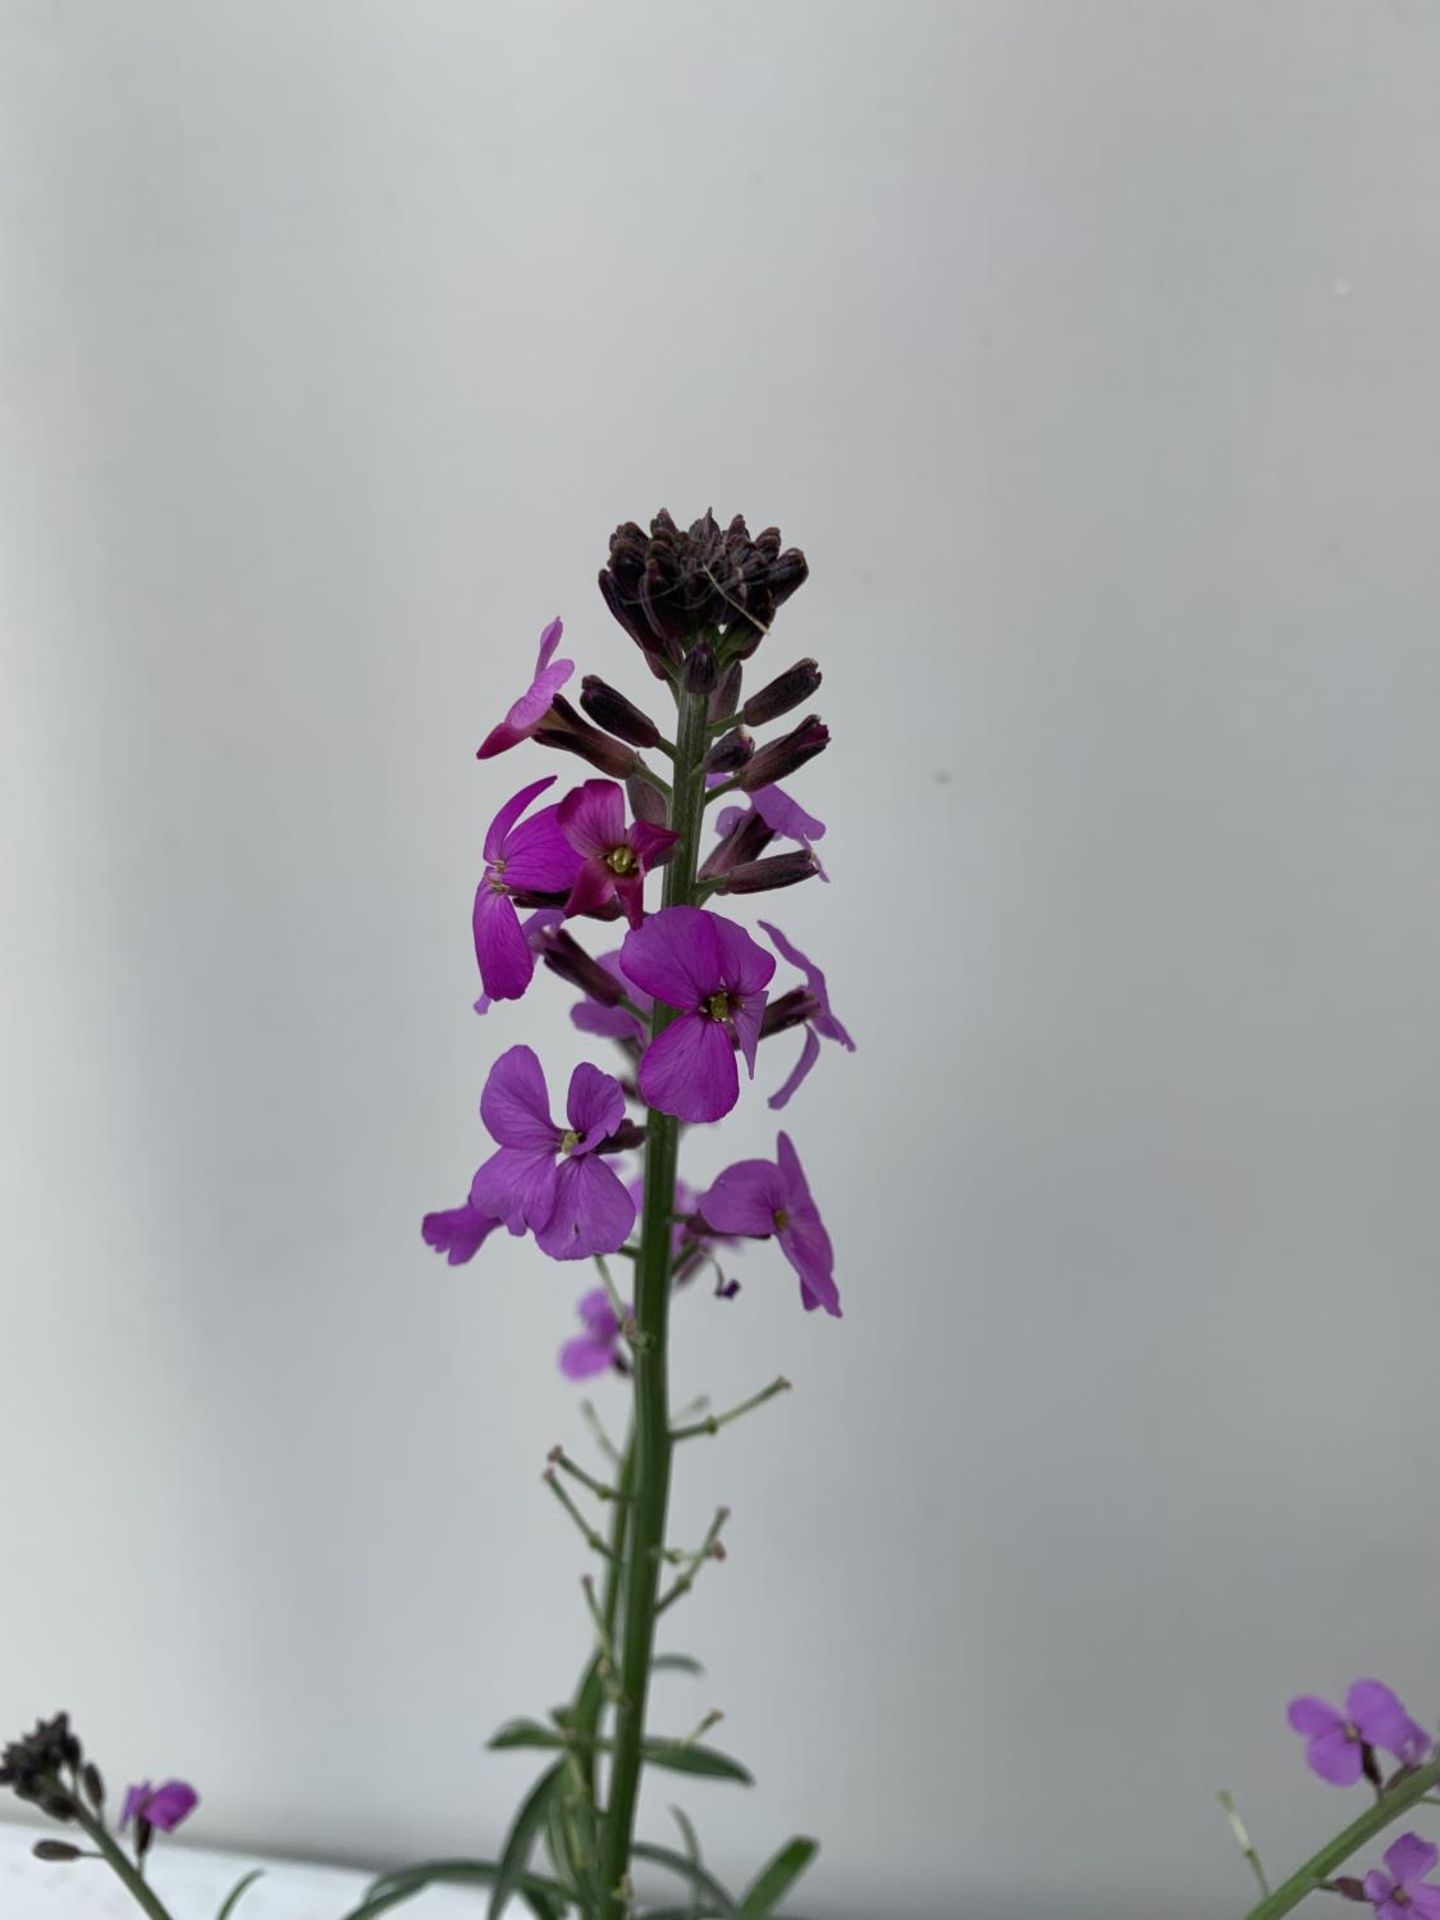 SIX ERYSIMUM BOWLES MAUVE IN 2 LTR POTS 40-50CM TALL TO BE SOLD FOR THE SIX PLUS VAT - Image 4 of 5